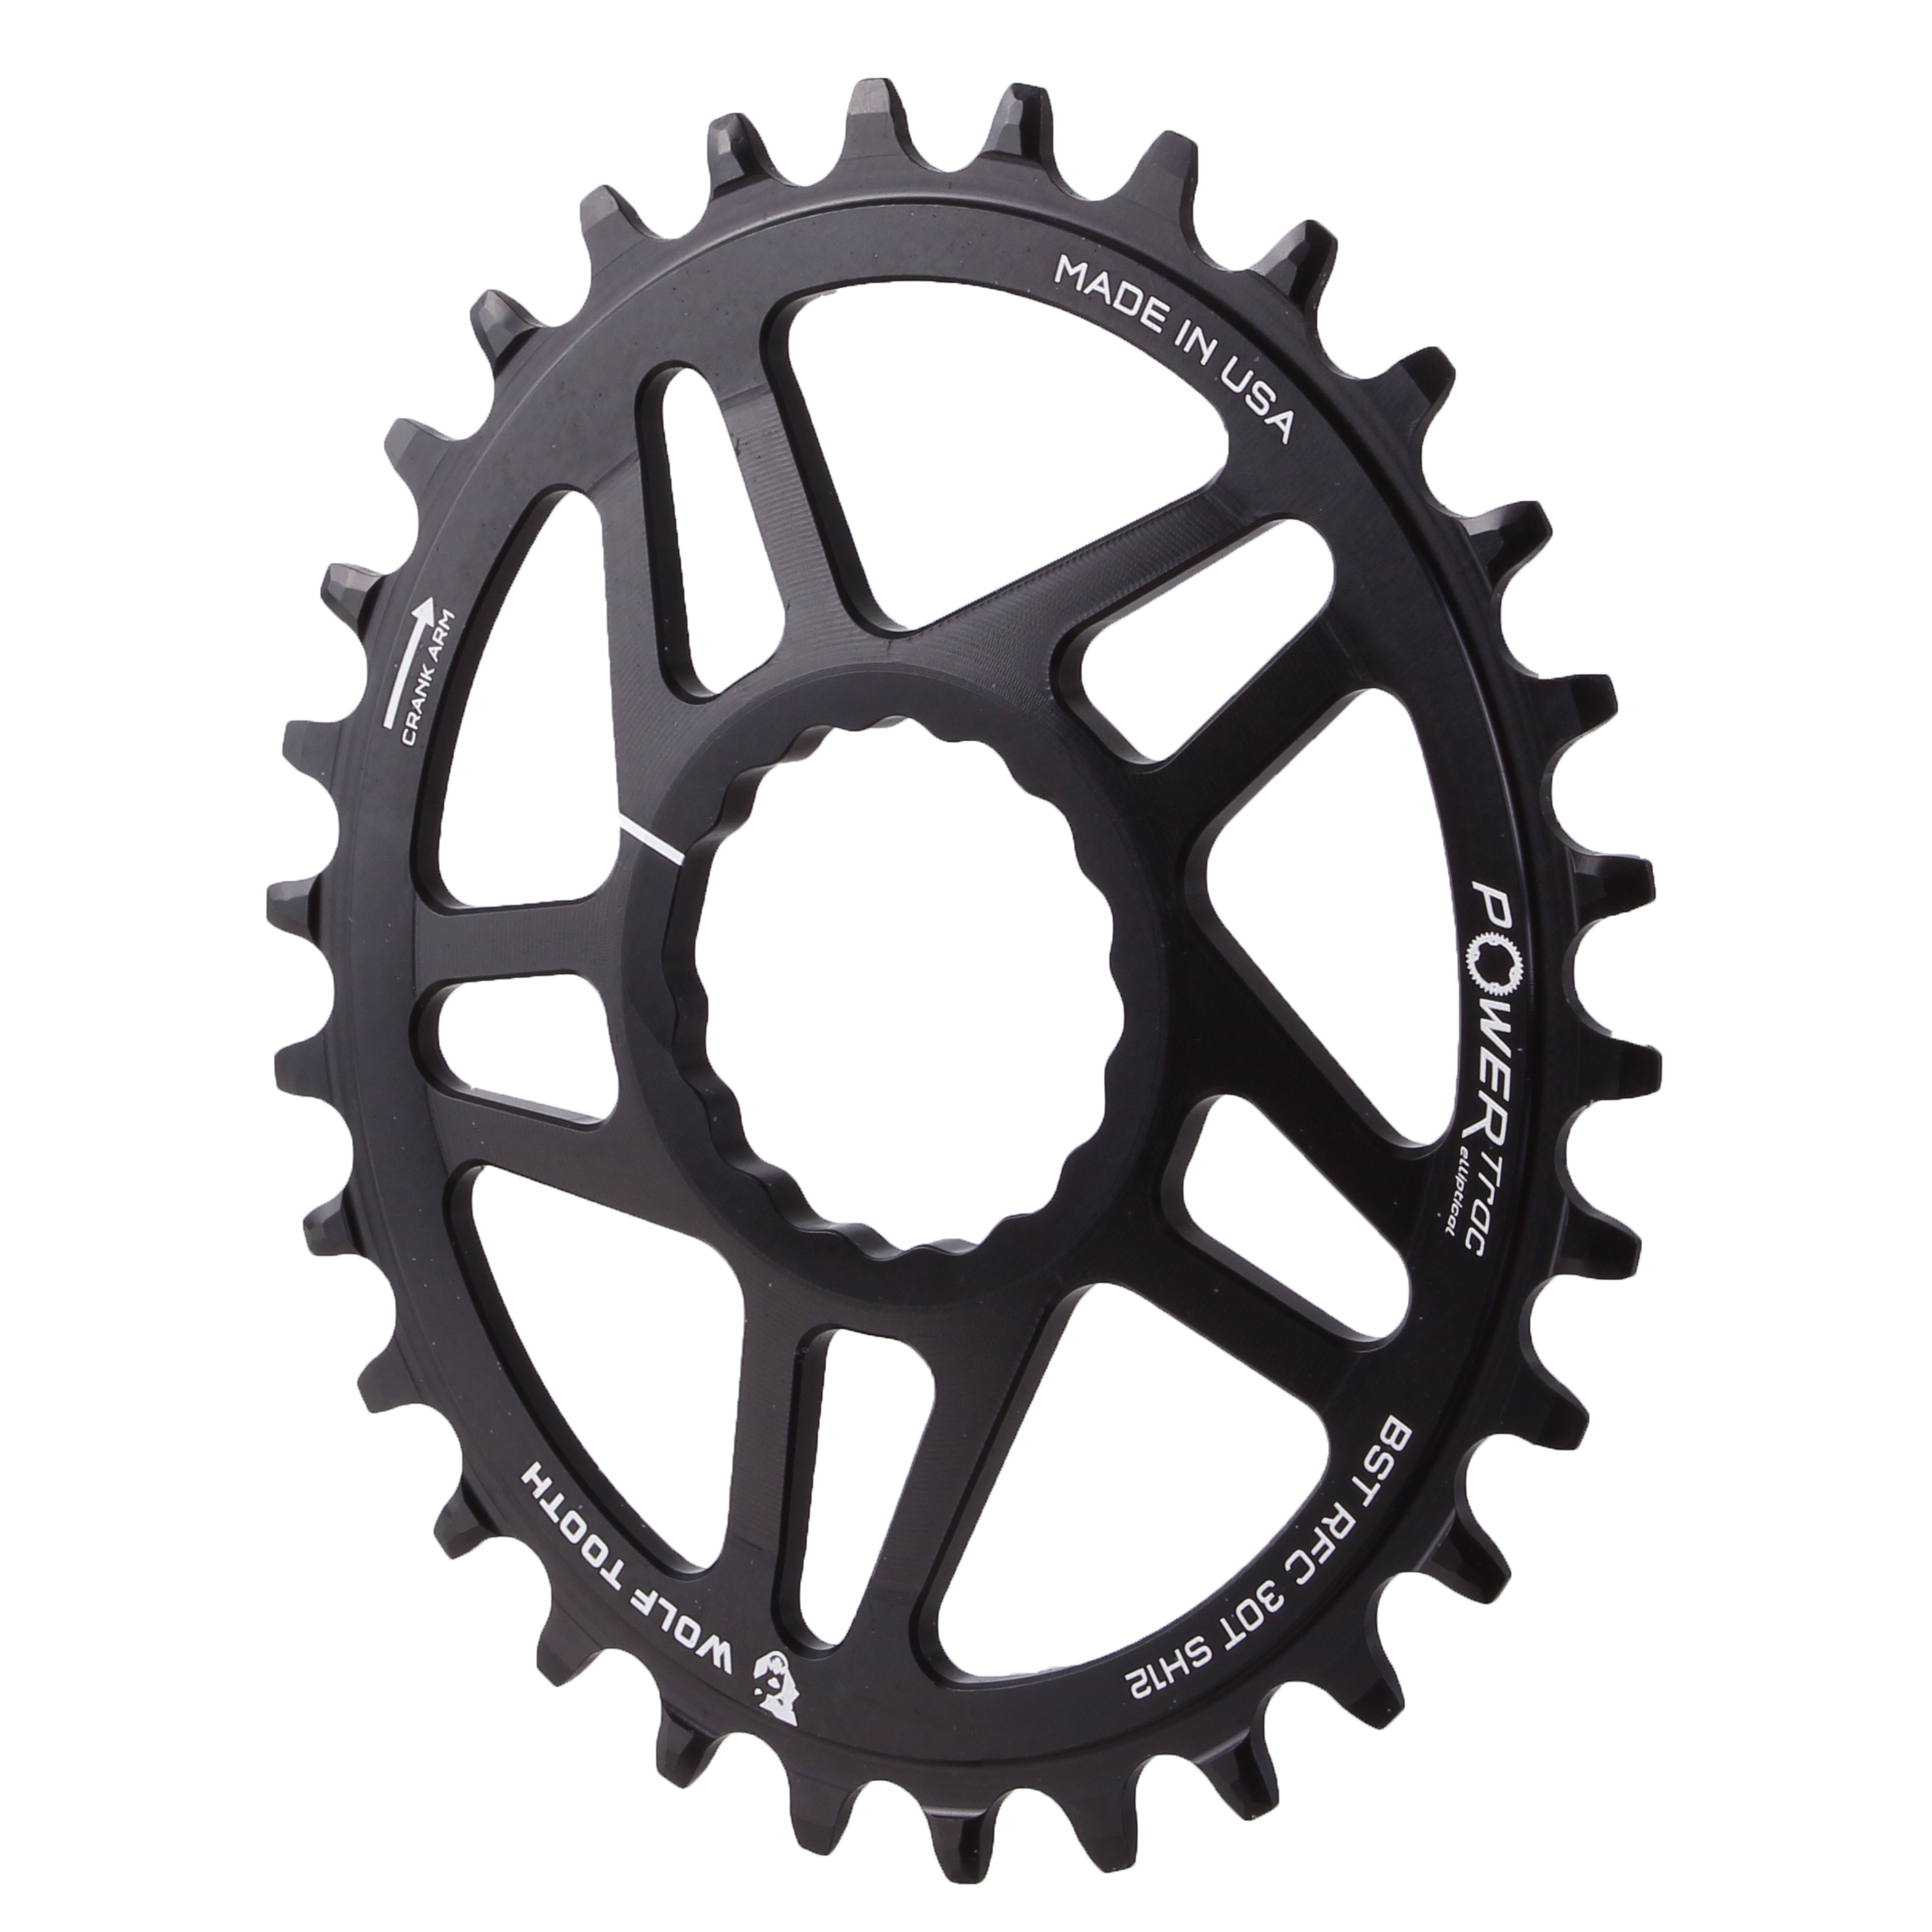 crank oval chainring